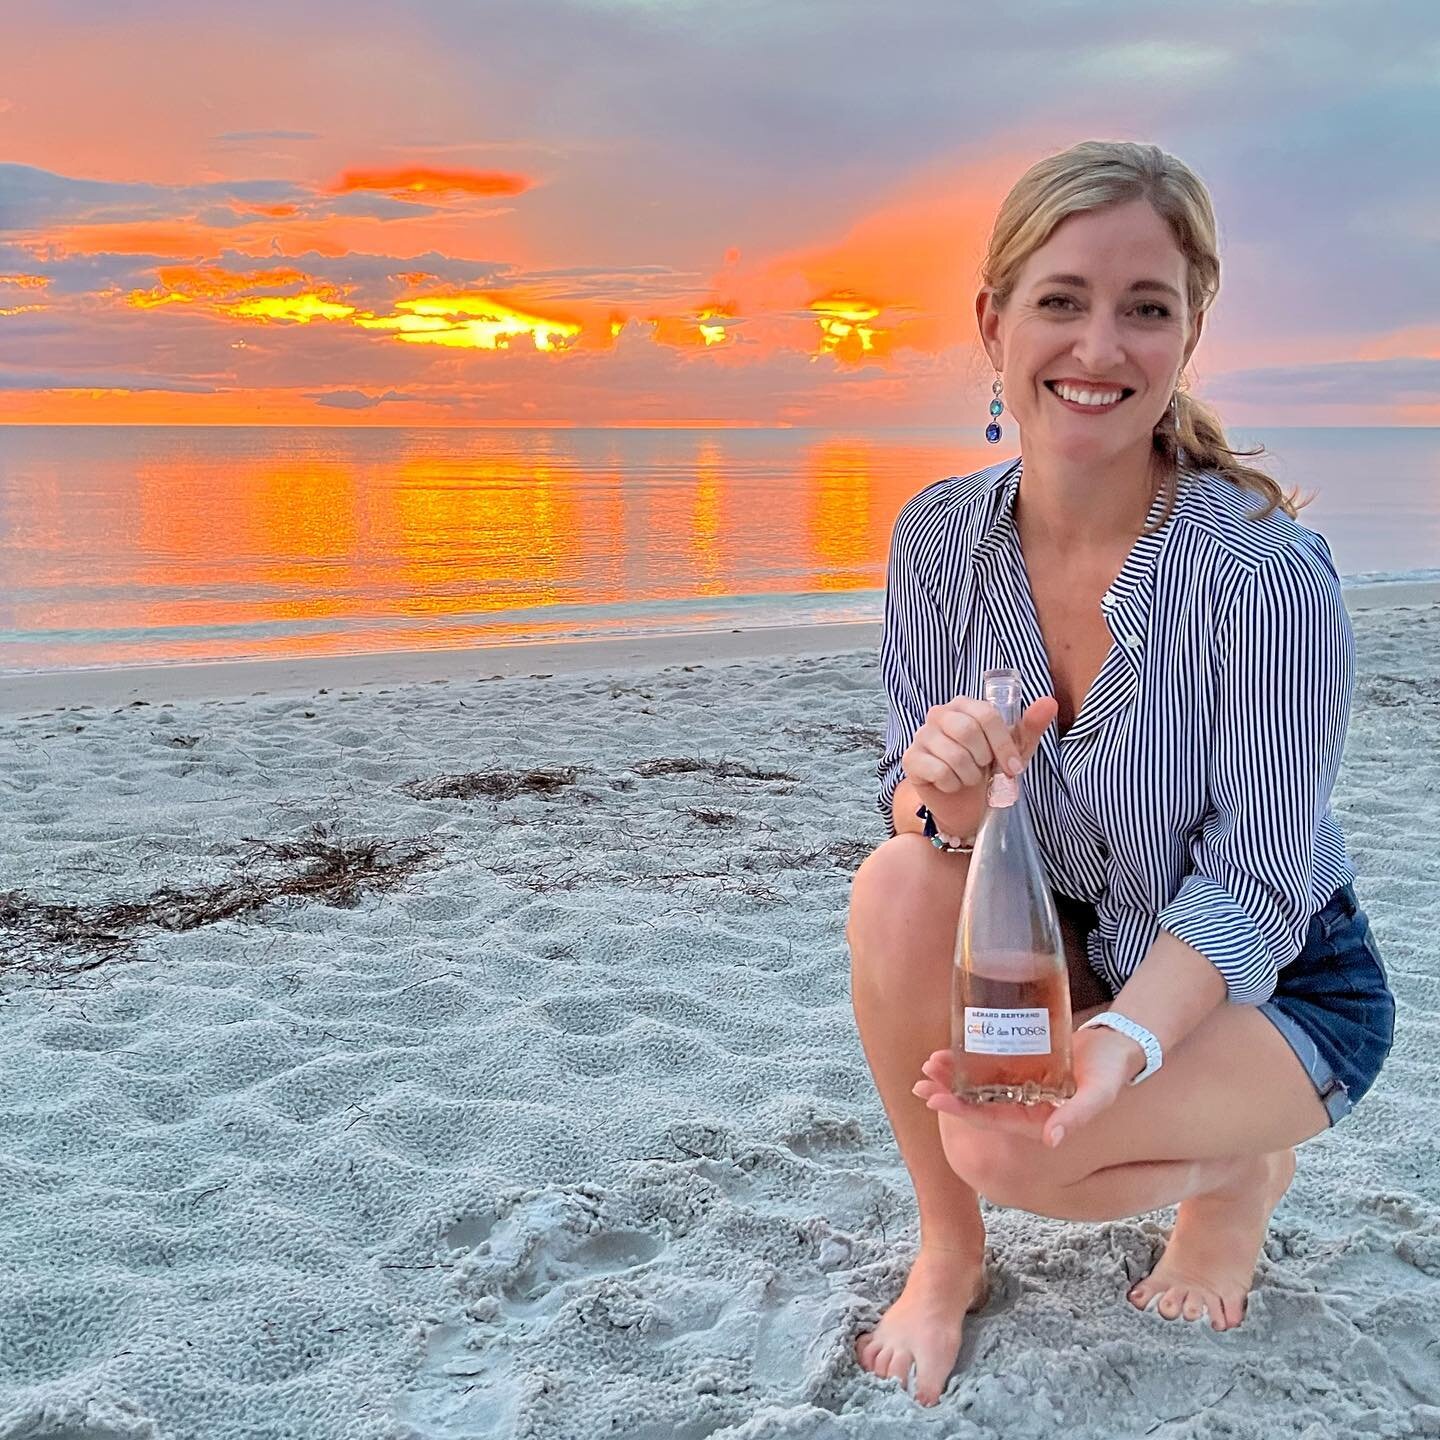 🌅 Love 💗 where you live! ❤️

Naples is such a special place. It&rsquo;s my favorite place to come home to. I&rsquo;m so grateful for all the friends I&rsquo;ve made here and all the beautiful things I&rsquo;ve experienced. I am ready for the next g